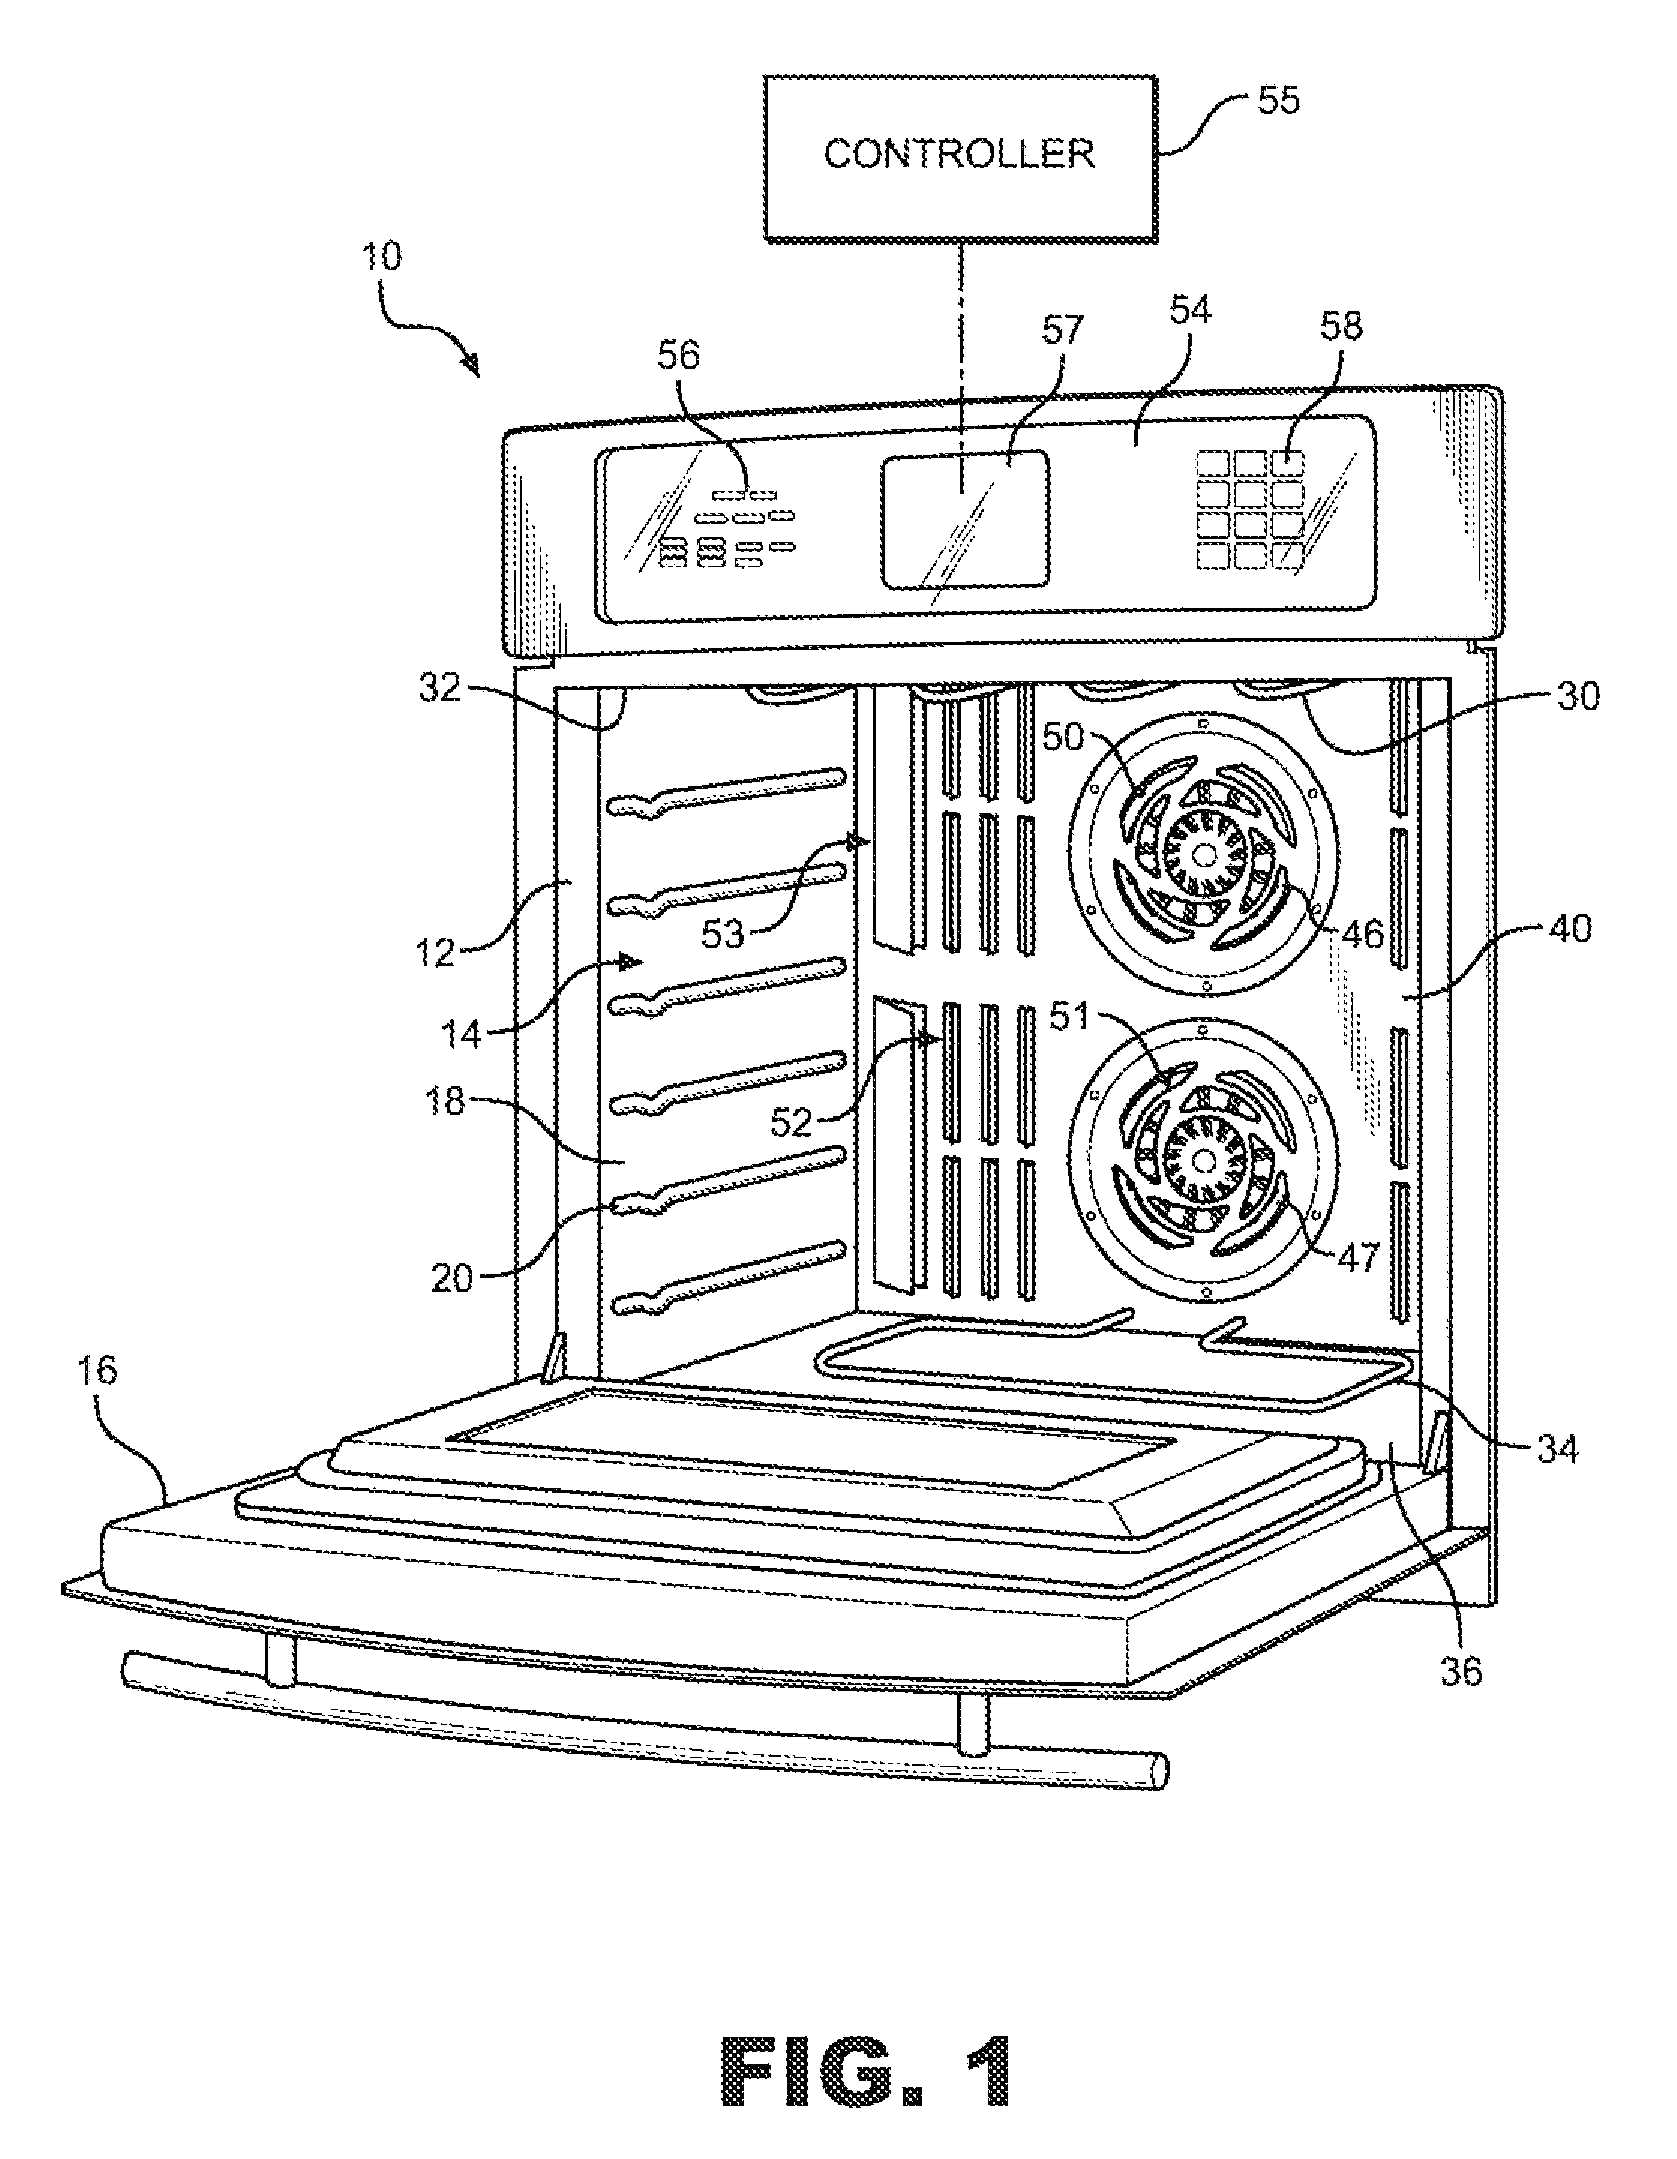 Priority controlled multi-fan convection oven